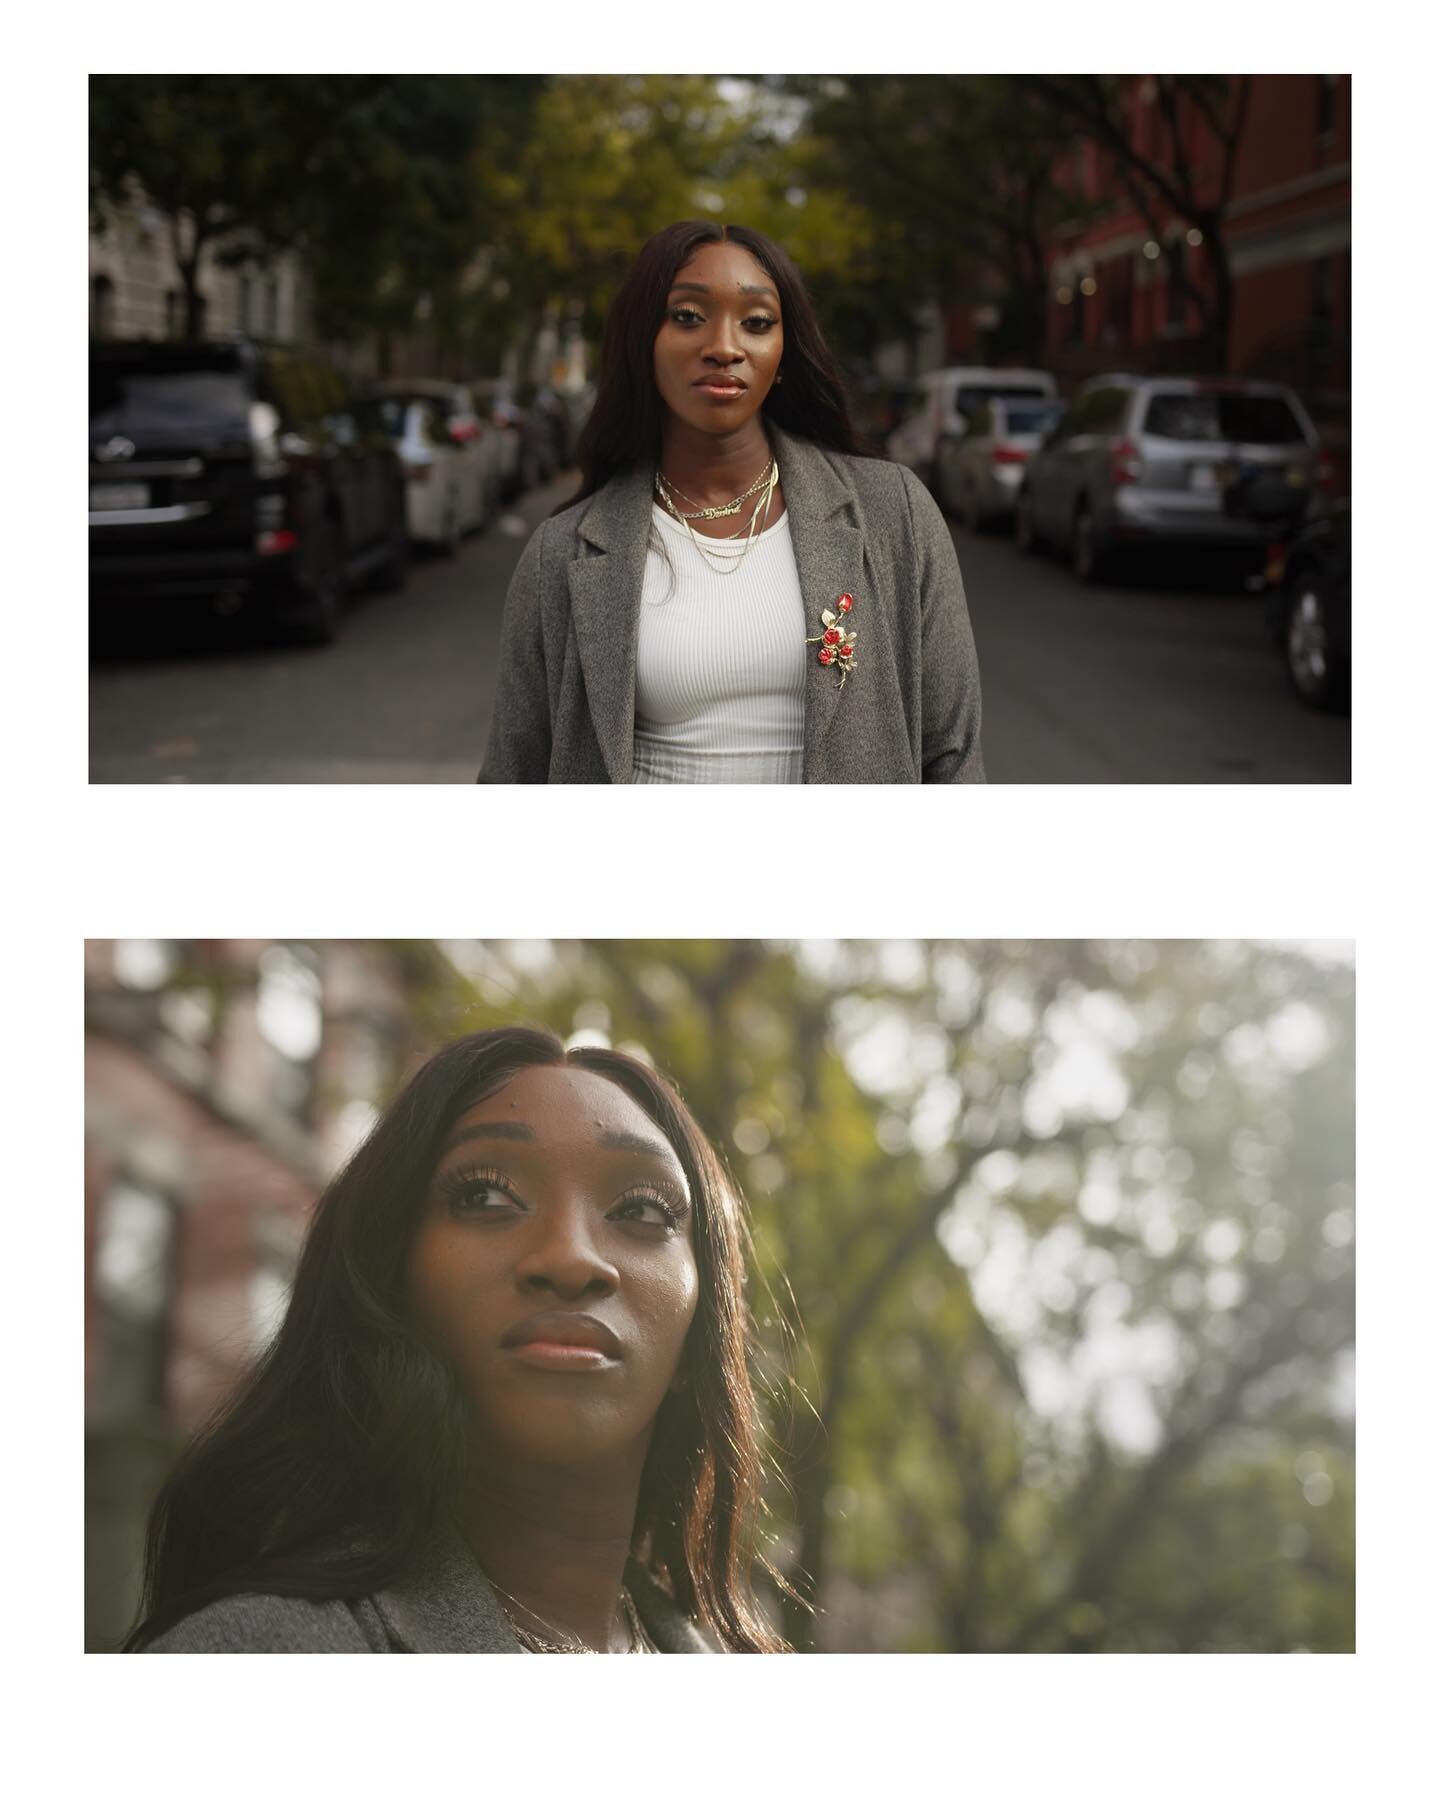 Some of my favorite #StillFrames from our #lovelettertoharlem @madamenoire shoot with @dnaybisme for @harlemonprime.

Check out the Full Piece on Madamenoire.com 

Shot on Sony FS7 #slog3
DP: @l2c_ceo 
Series Producer: @ash_4days 
Field Producer: @ia